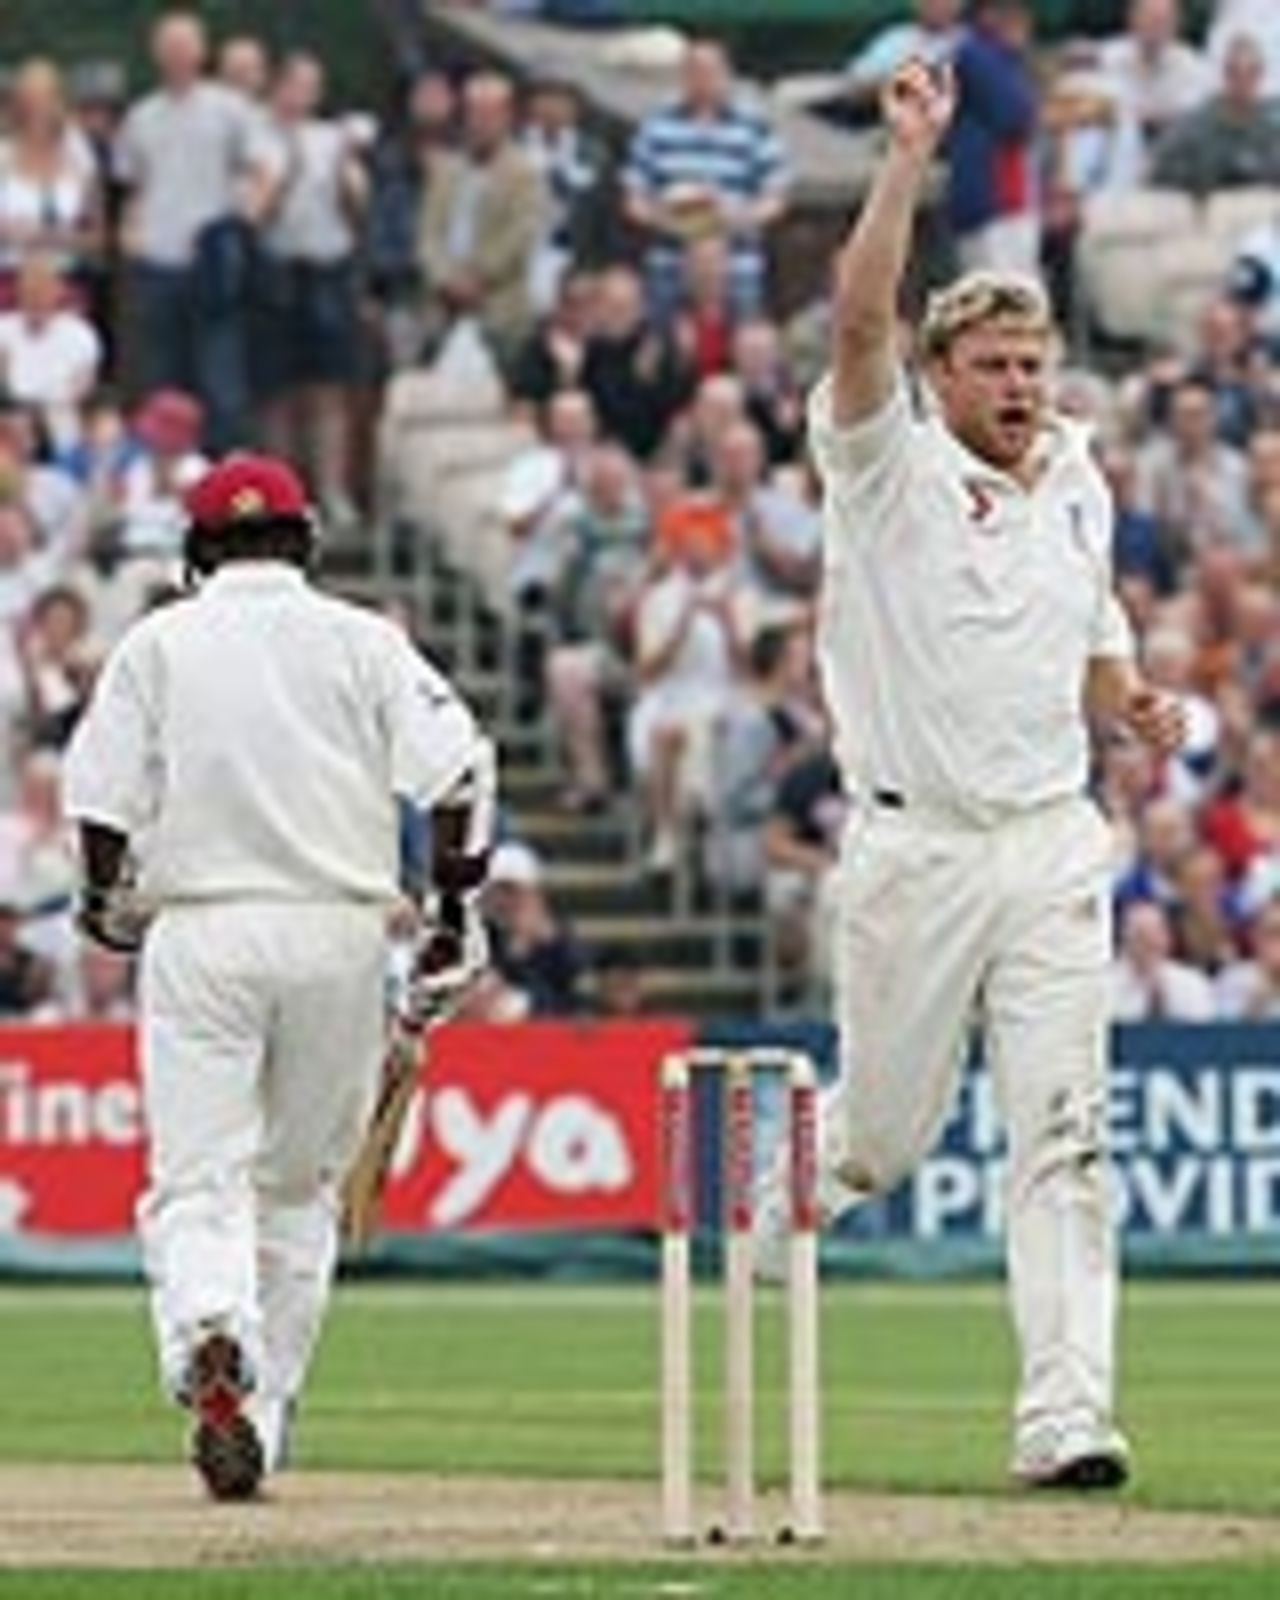 Andrew Flintoff makes the early breakthrough, England v West Indies, Old Trafford, August 14, 2004